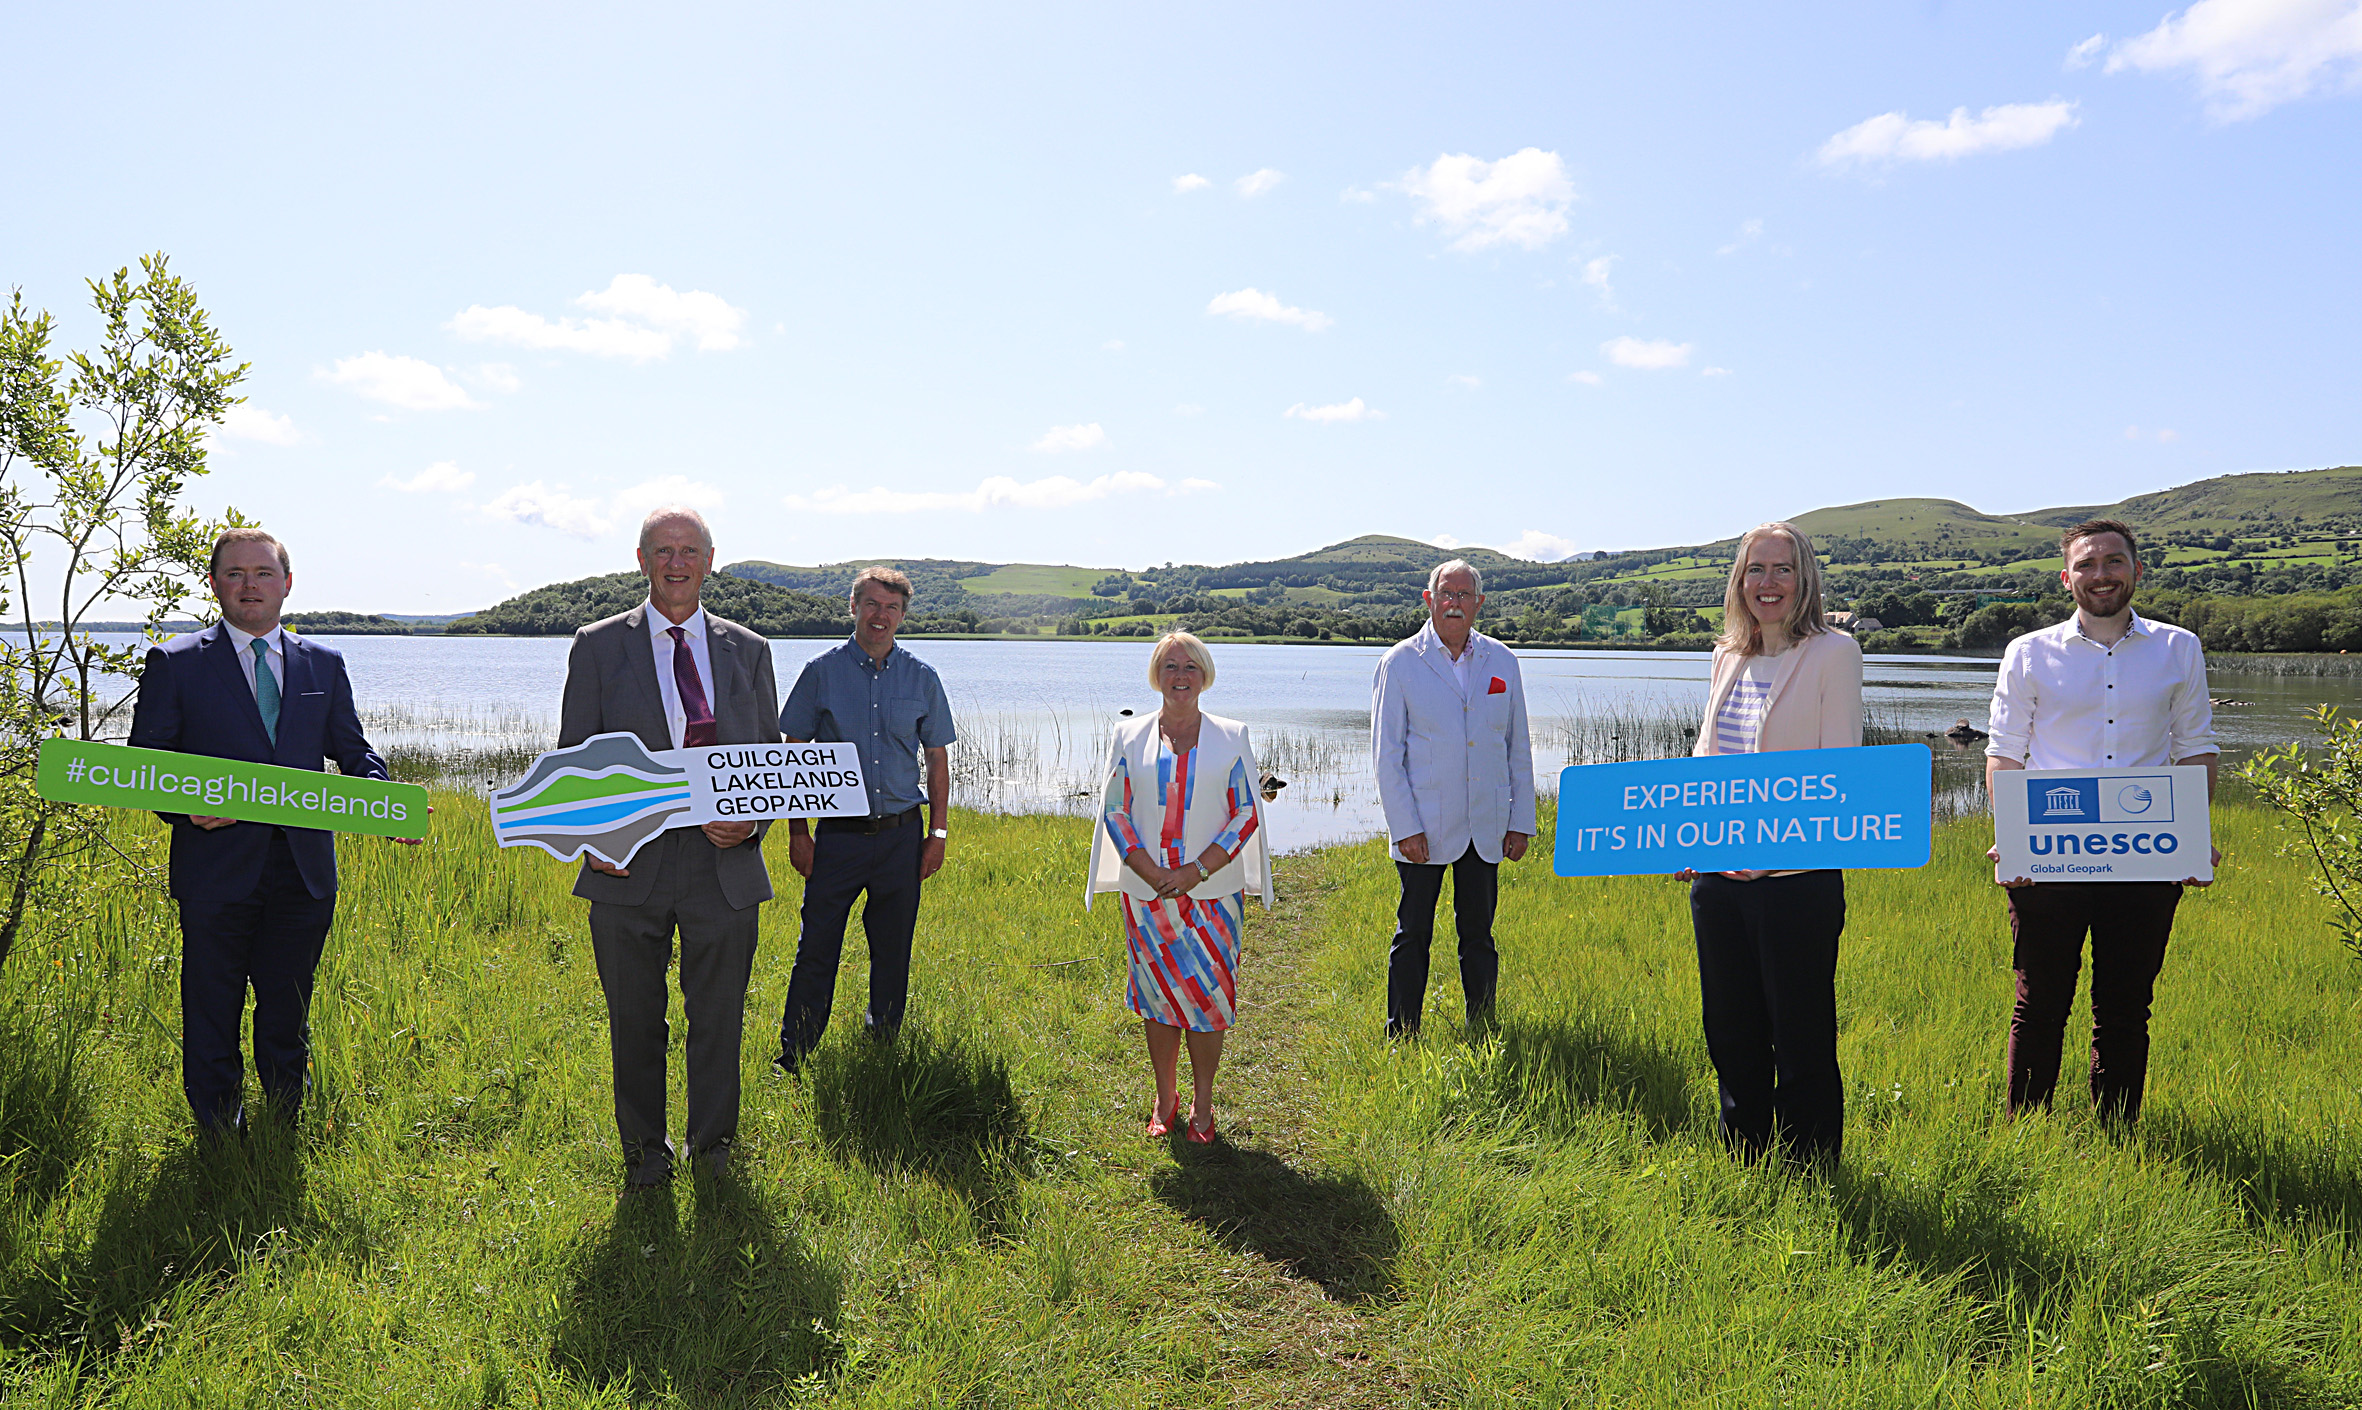 Cuilcagh Lakelands Geopark: Rebrand to strengthen tourism in area